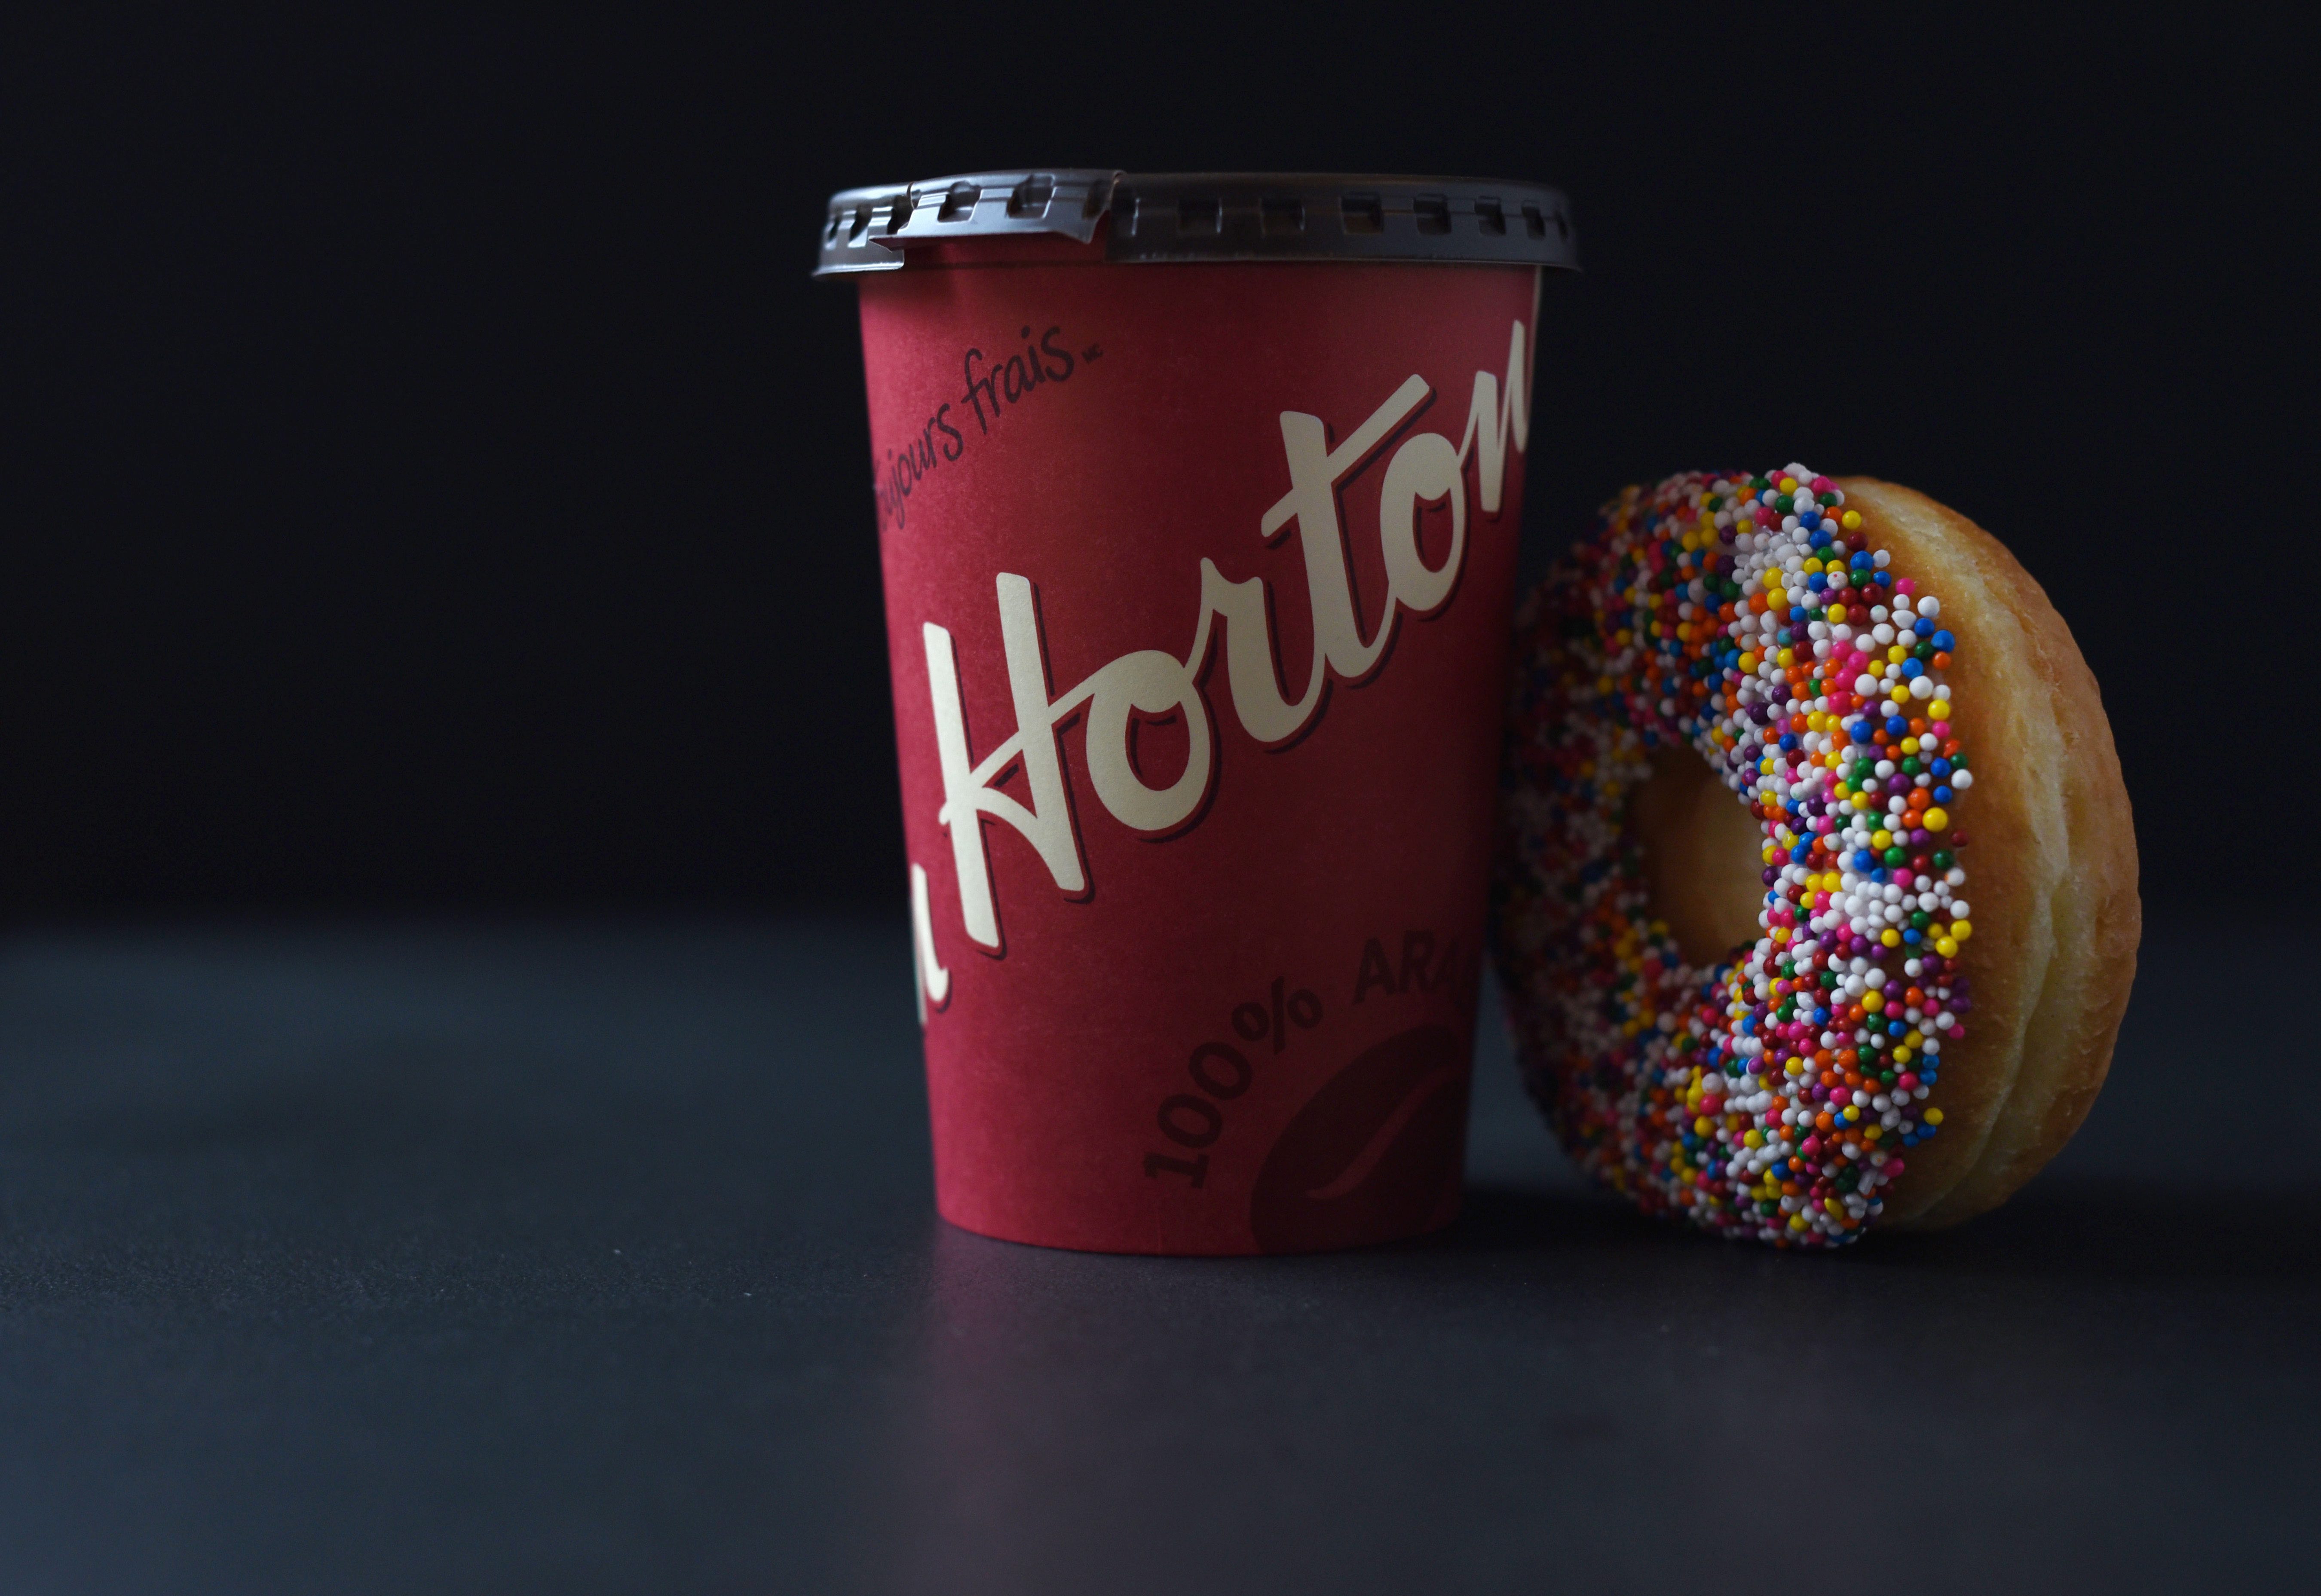 We ate and compared McDonald's new donuts to Tim Hortons so you don't have  to - Prince George Citizen